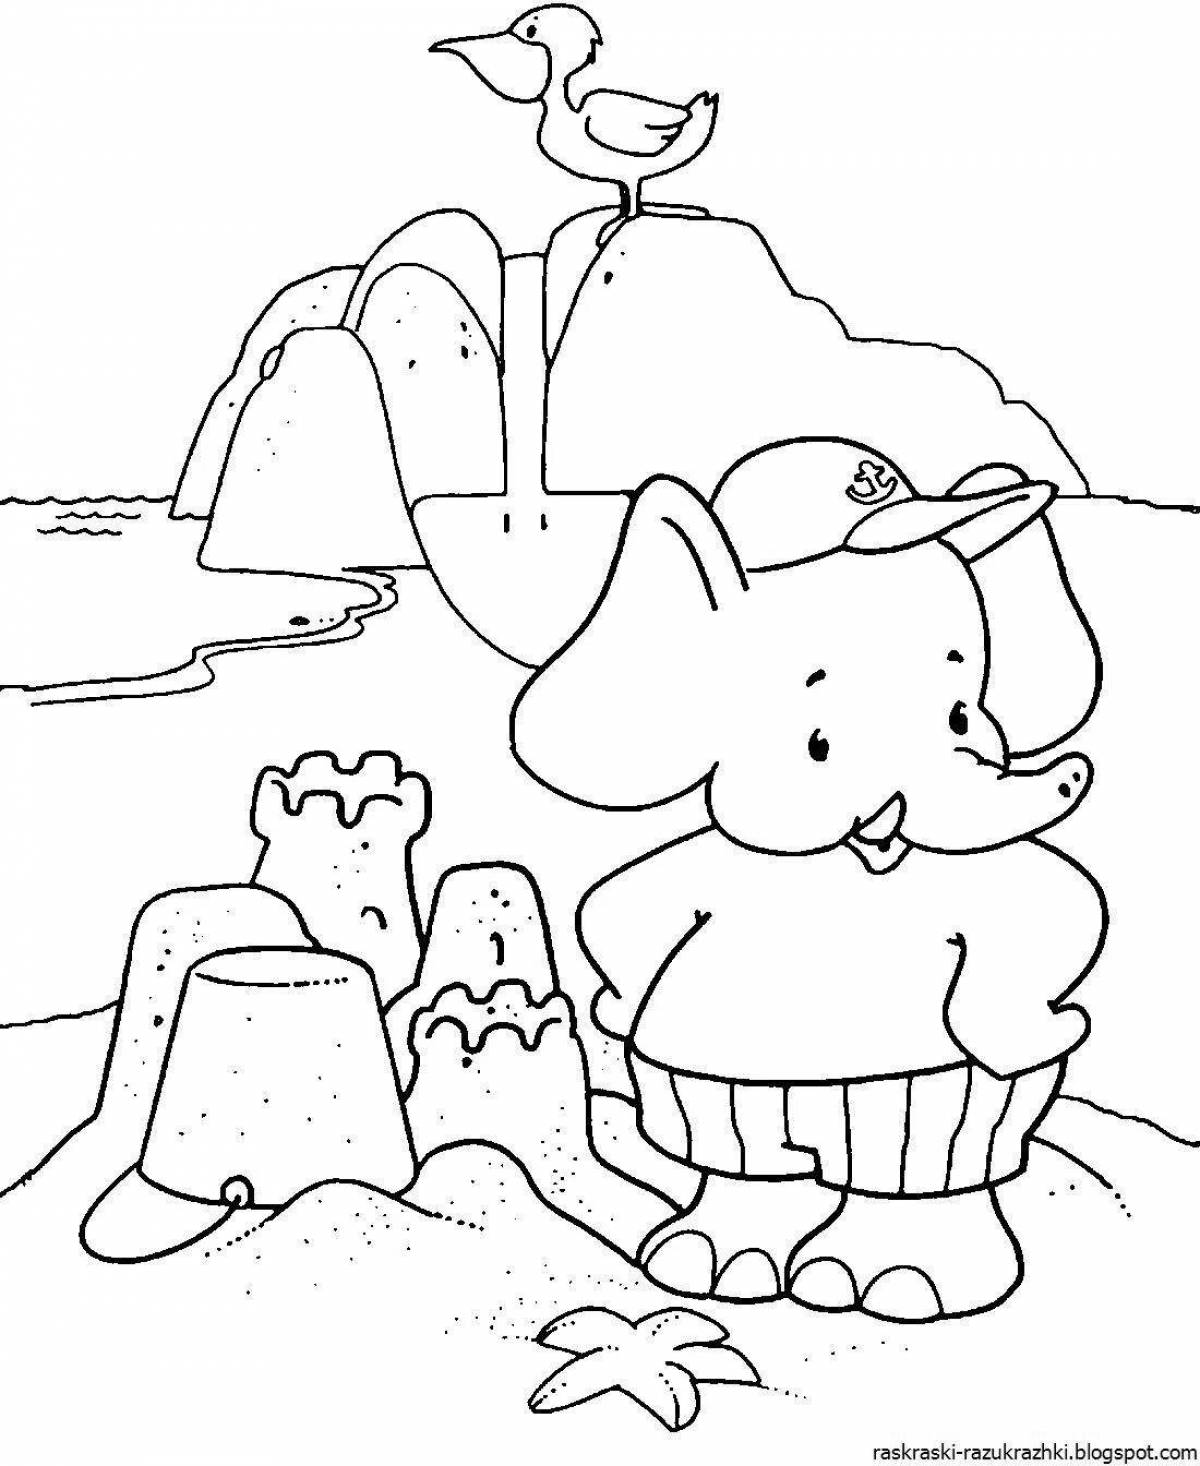 Relaxing sand coloring page